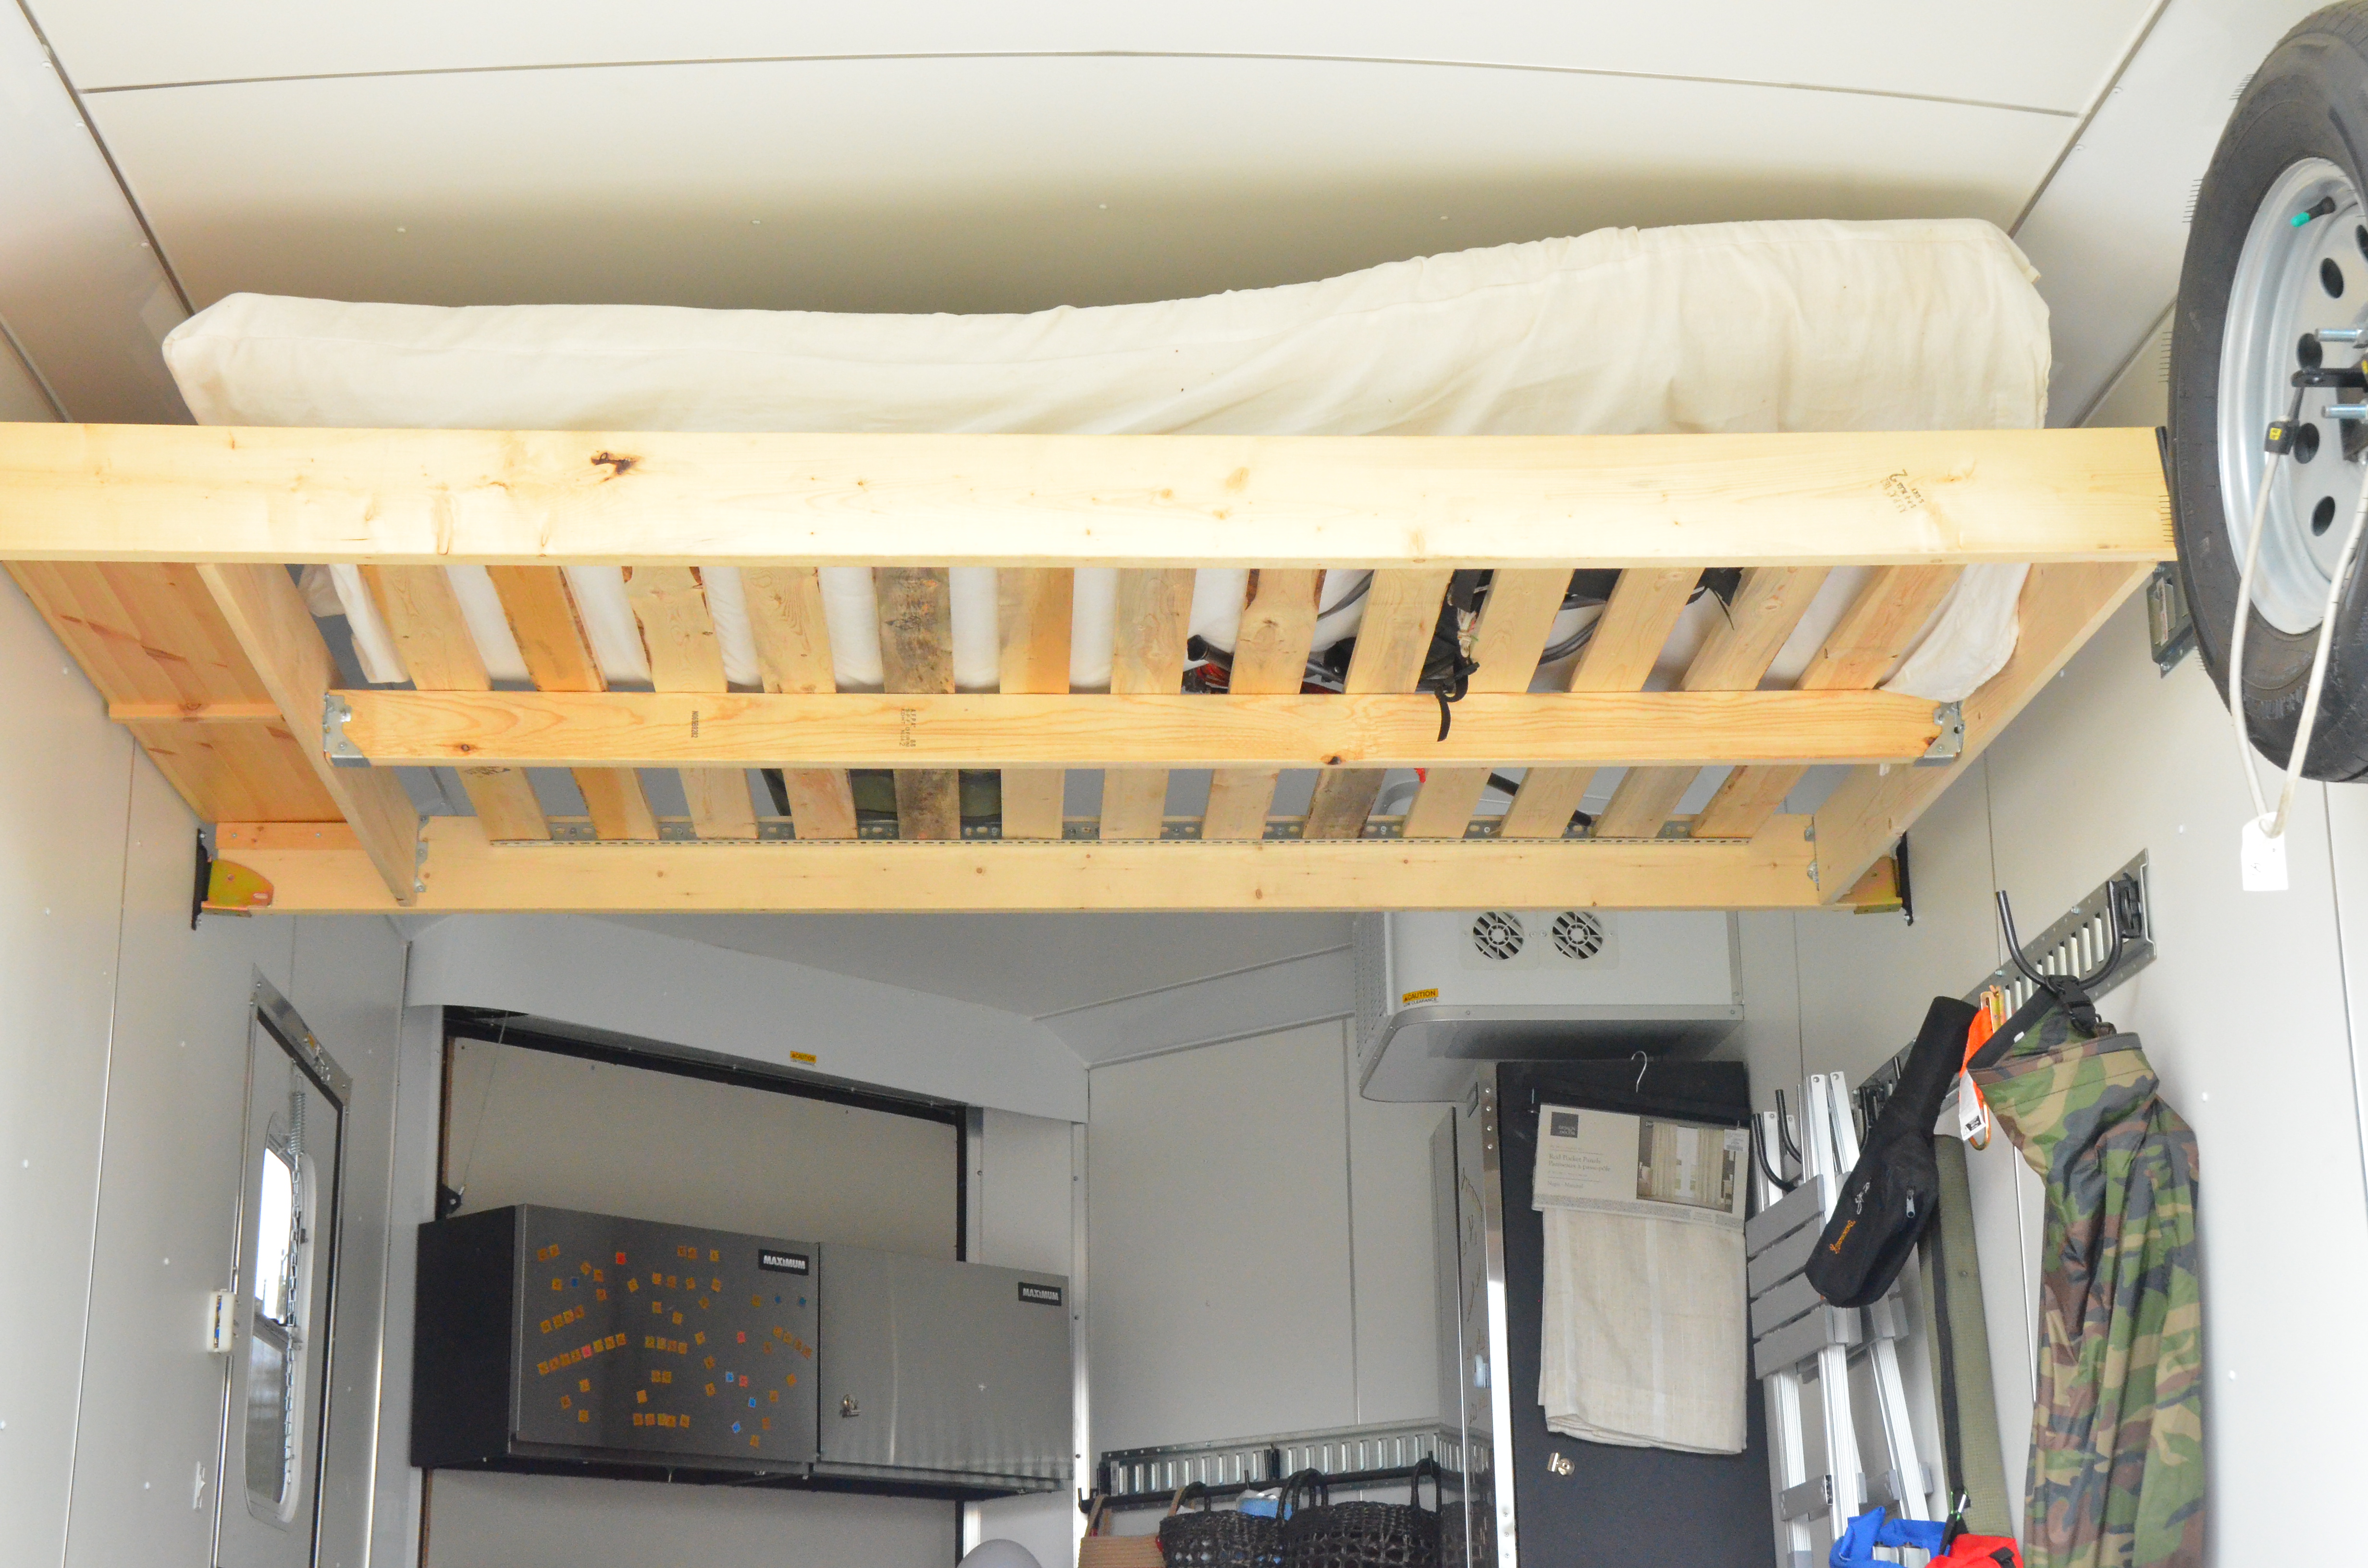 Picture shows the bed raised against the ceiling in the trailer conversion